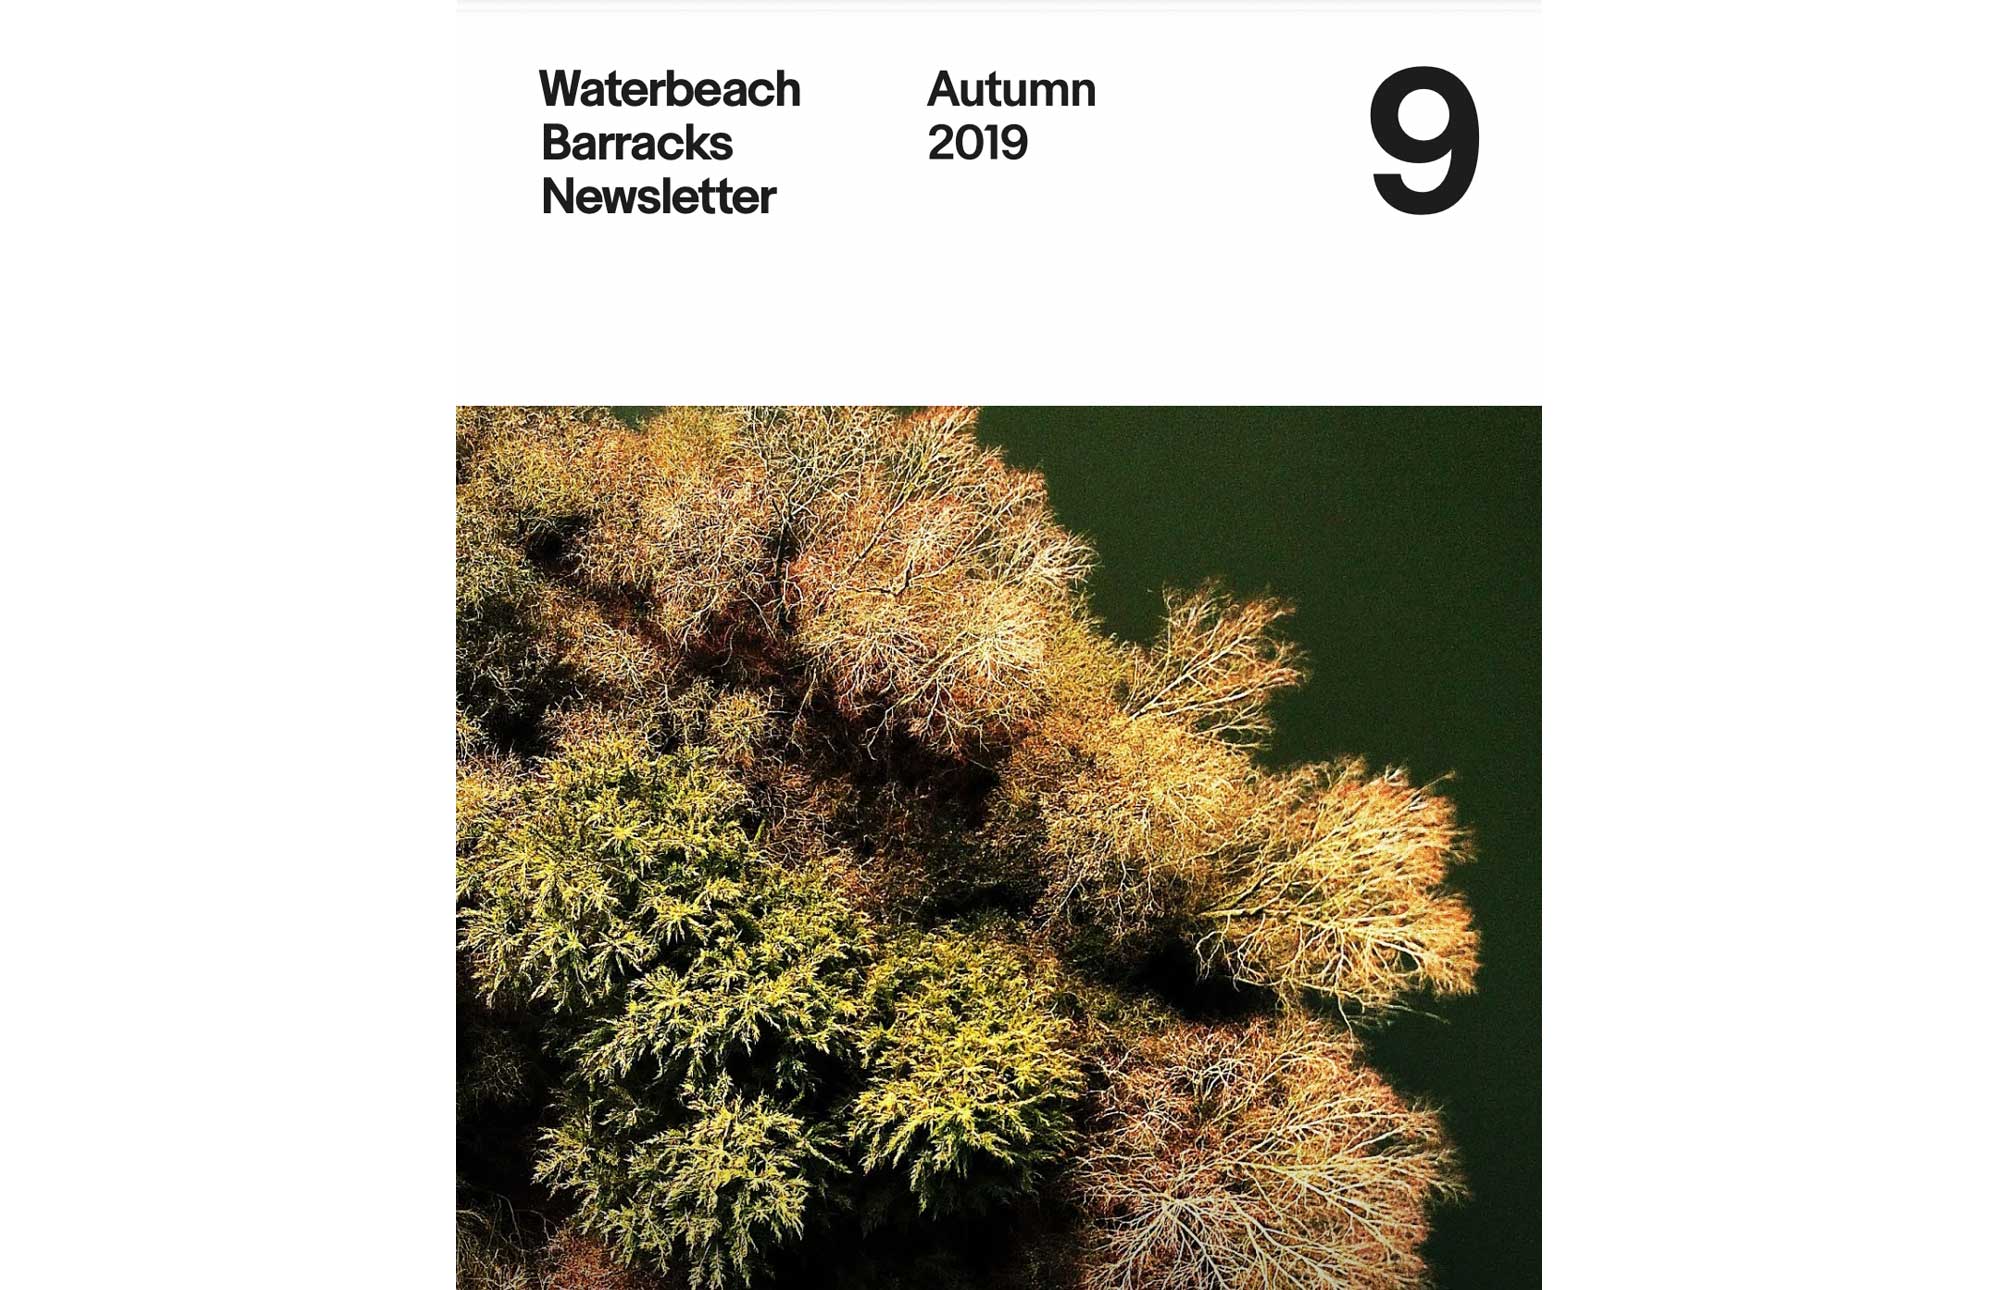 Featured image for “Waterbeach Barracks Newsletter Autumn 2019”